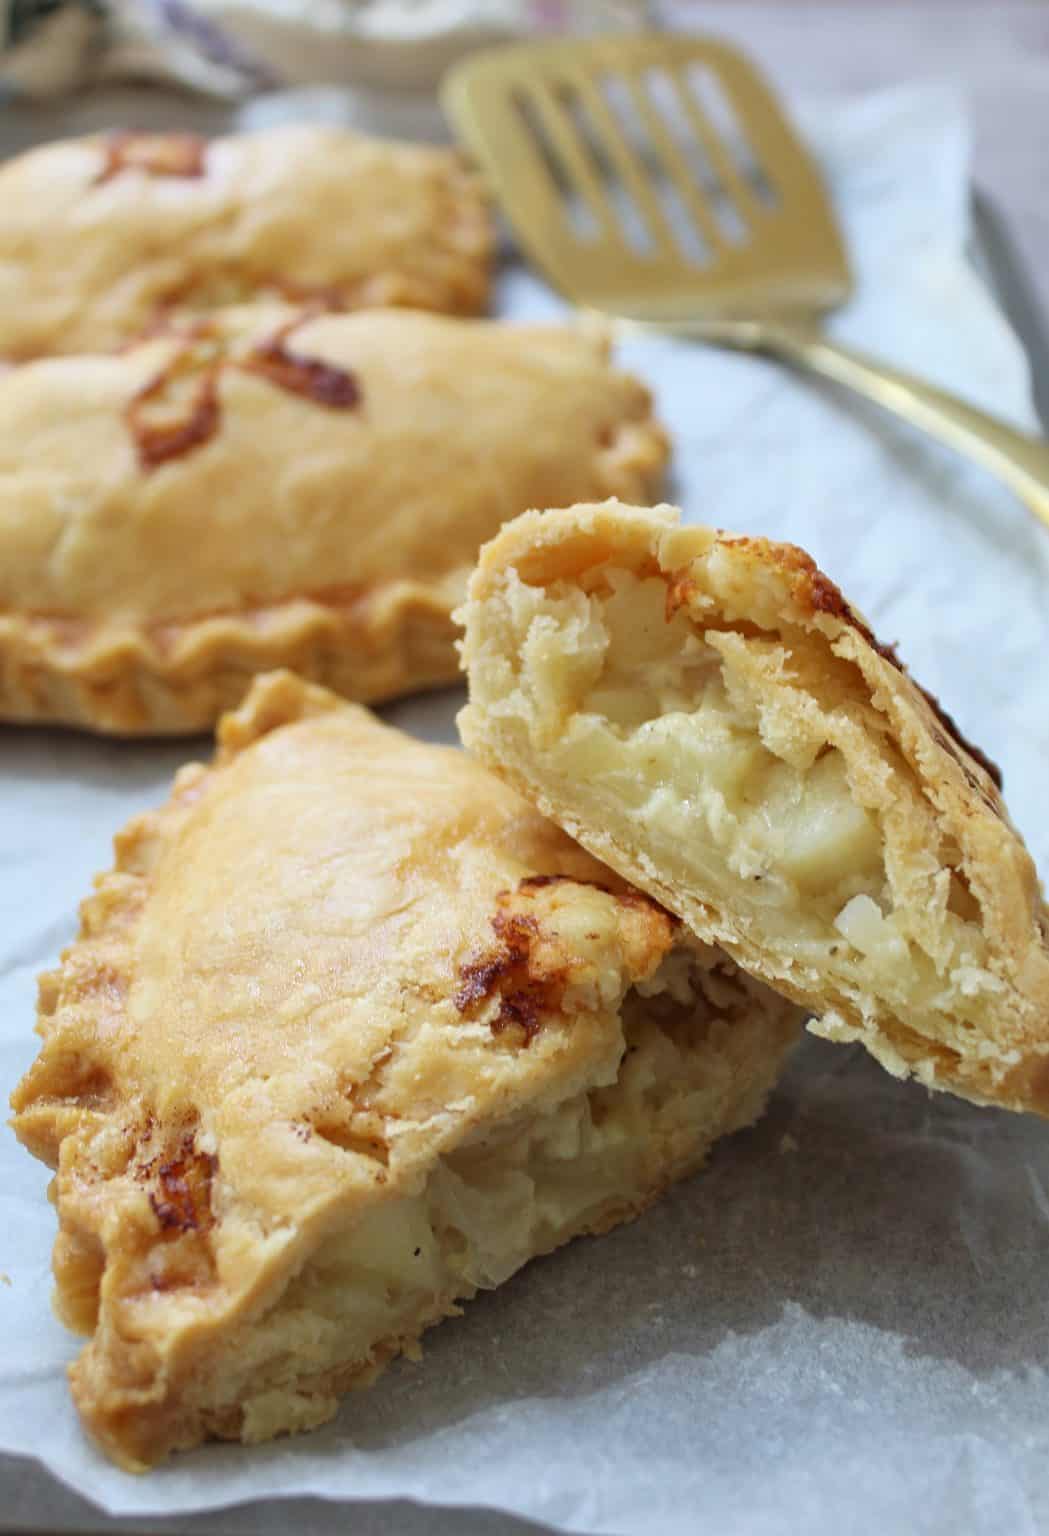 Gluten Free Cheese and Onion Pasty - The Gluten Free Blogger